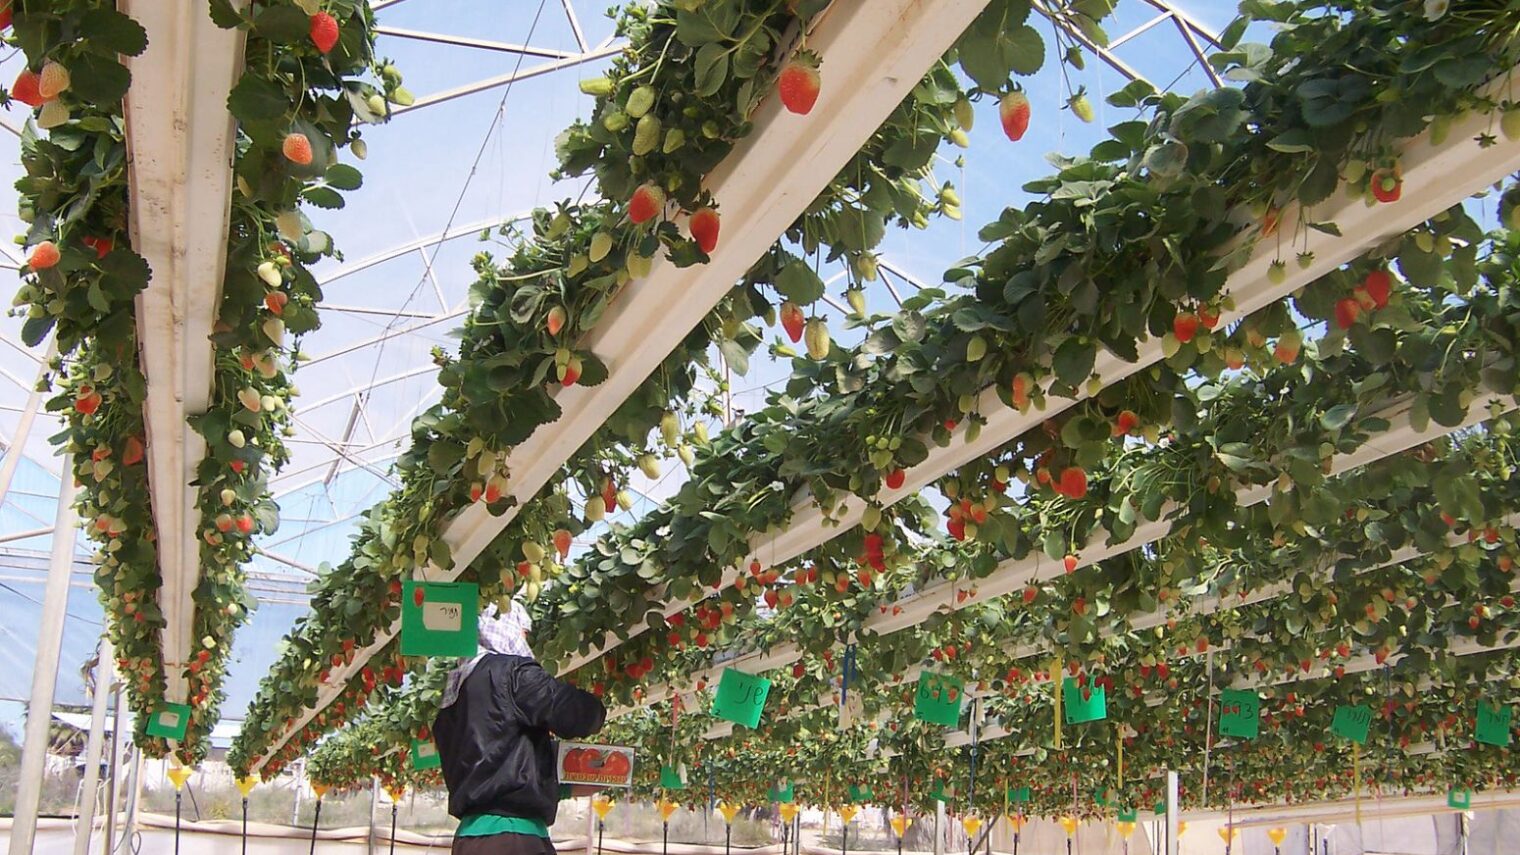 Growing strawberries at the Ramat Negev Agro-Research Center. Photo courtesy